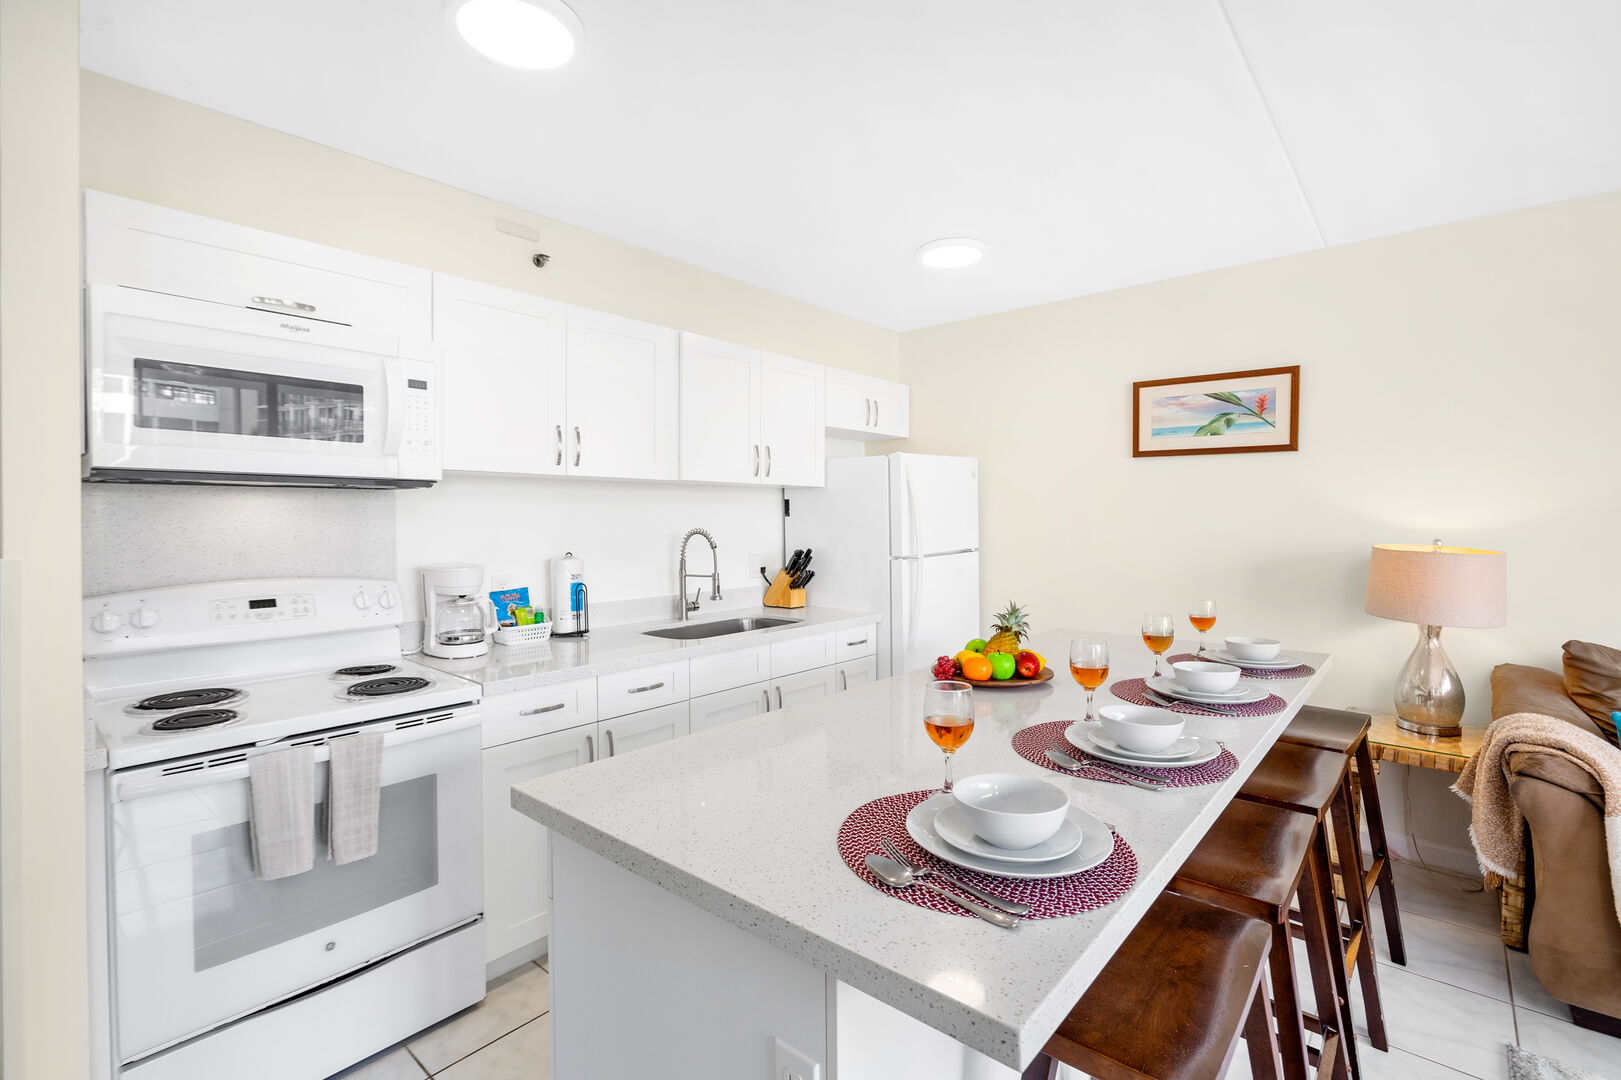 Make delicious meals in this fully renovated equipped kitchen!